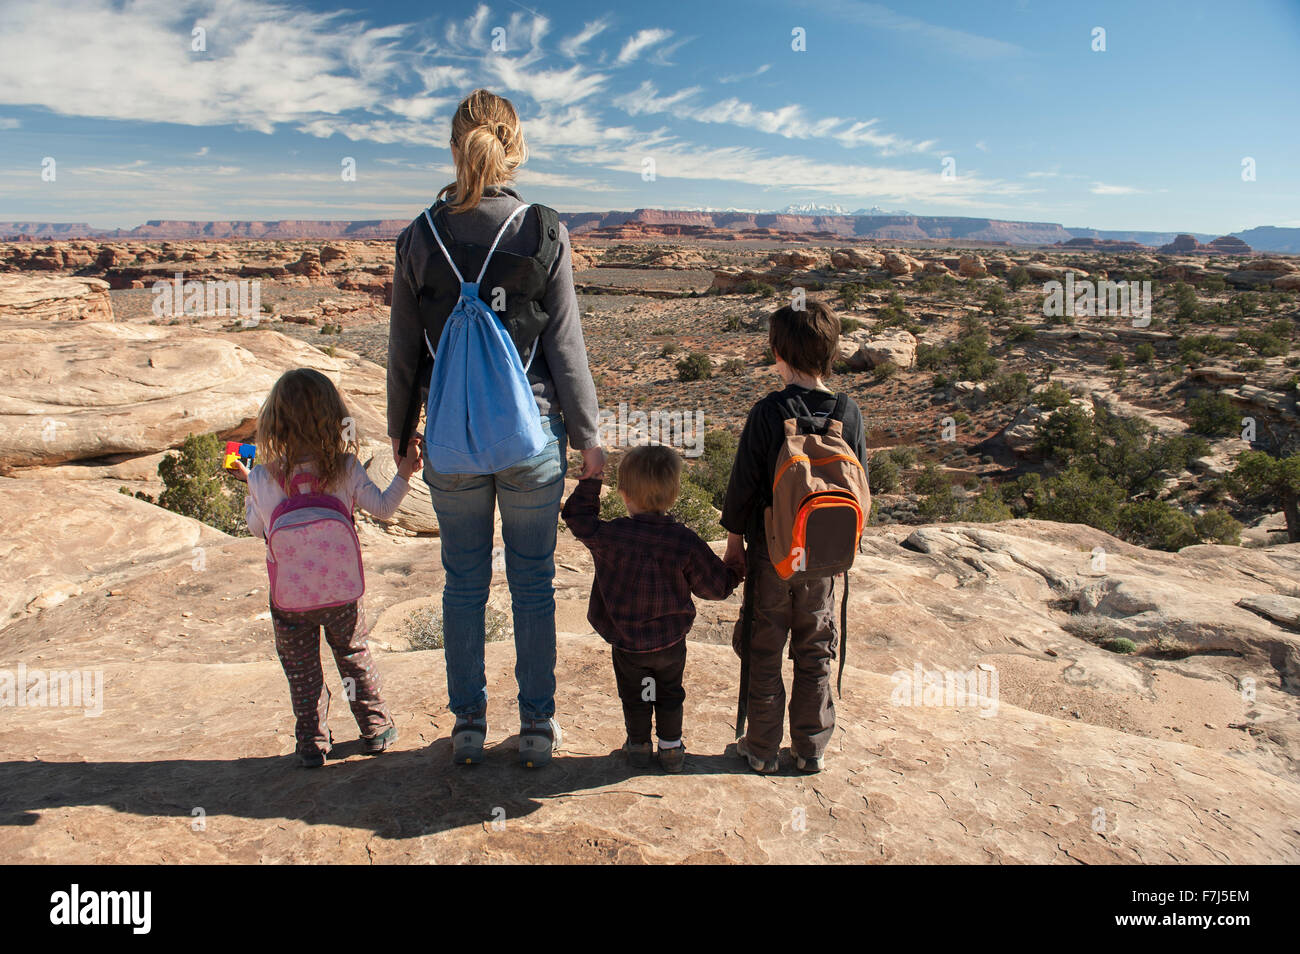 Family looking at scenic view in Canyonlands National Park, Utah, USA Stock Photo